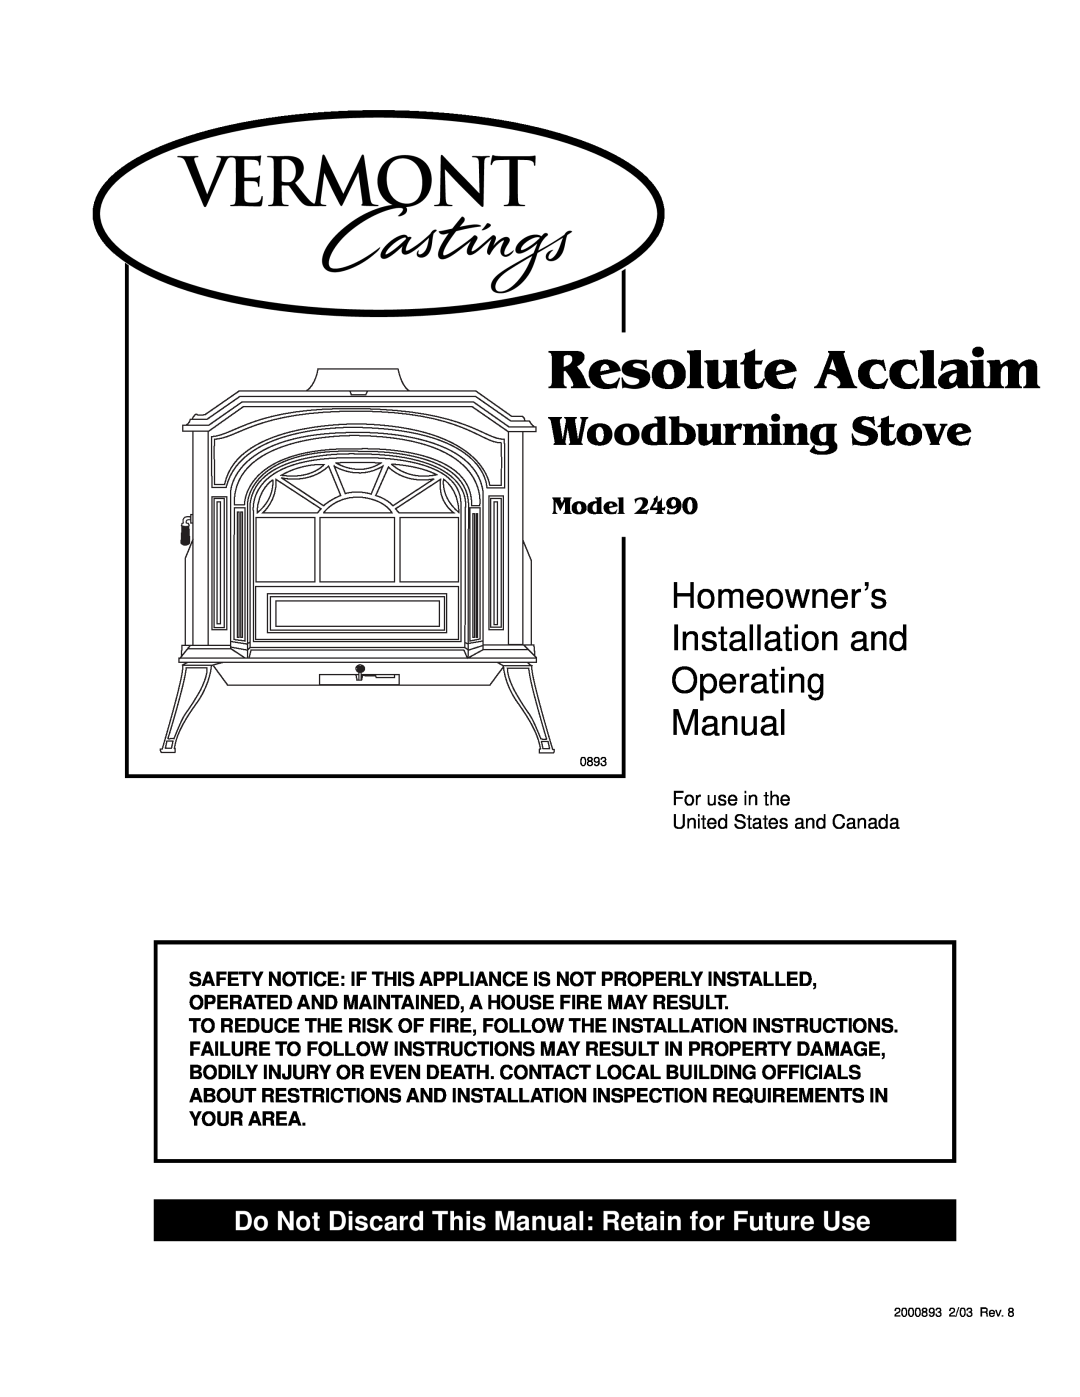 Majestic Appliances 2490 installation instructions Resolute Acclaim, Woodburning Stove, Homeowner’s, Installation and 